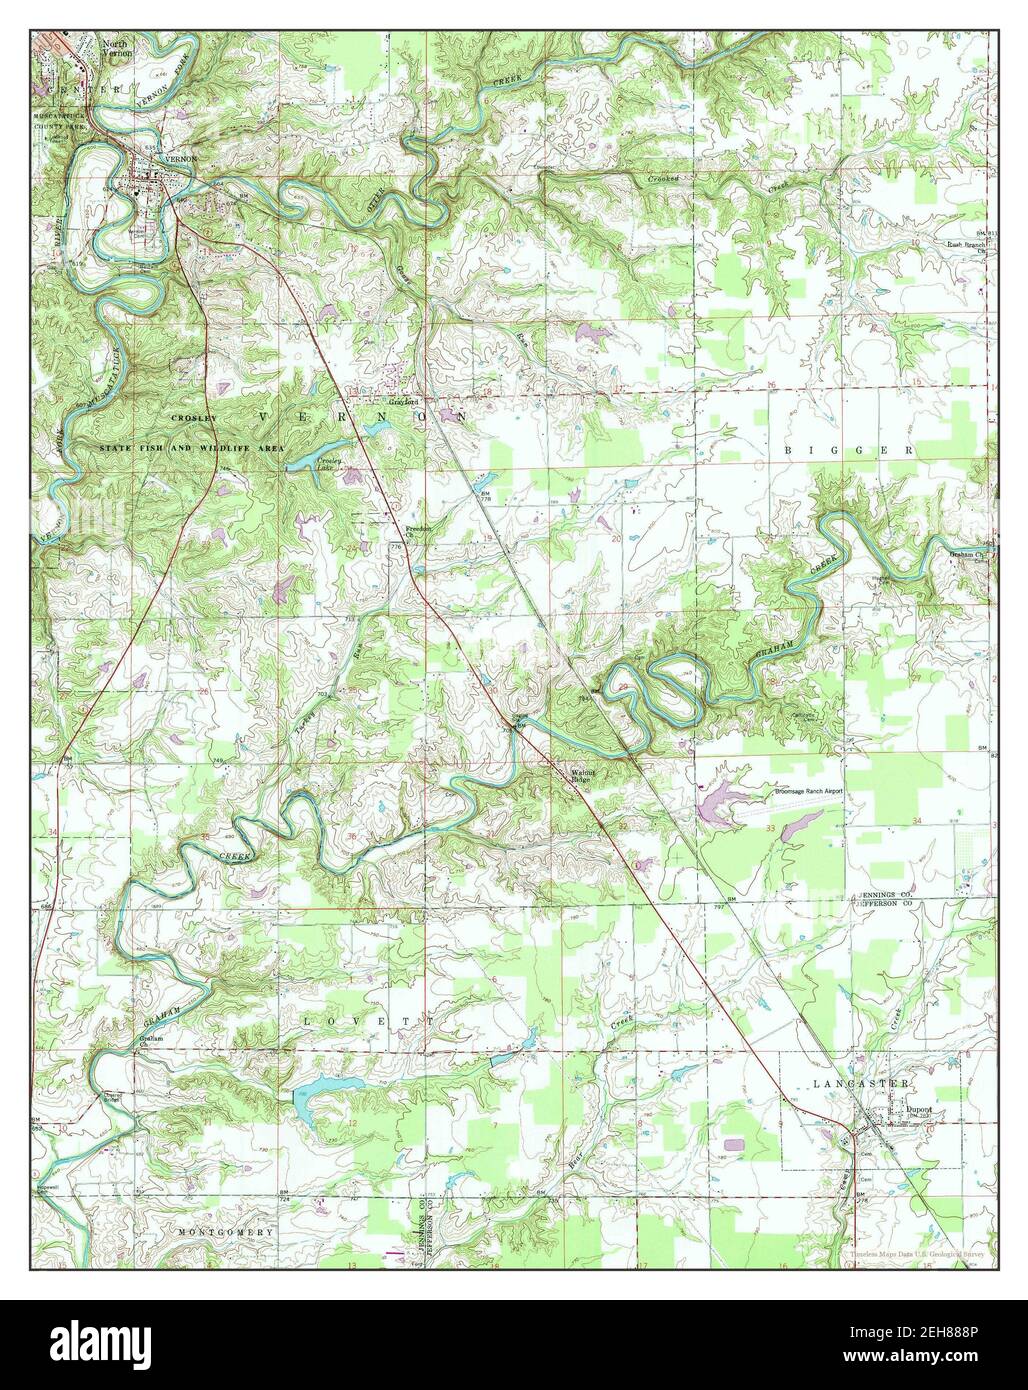 Vernon, Indiana, map 1959, 1:24000, United States of America by Timeless Maps, data U.S. Geological Survey Stock Photo